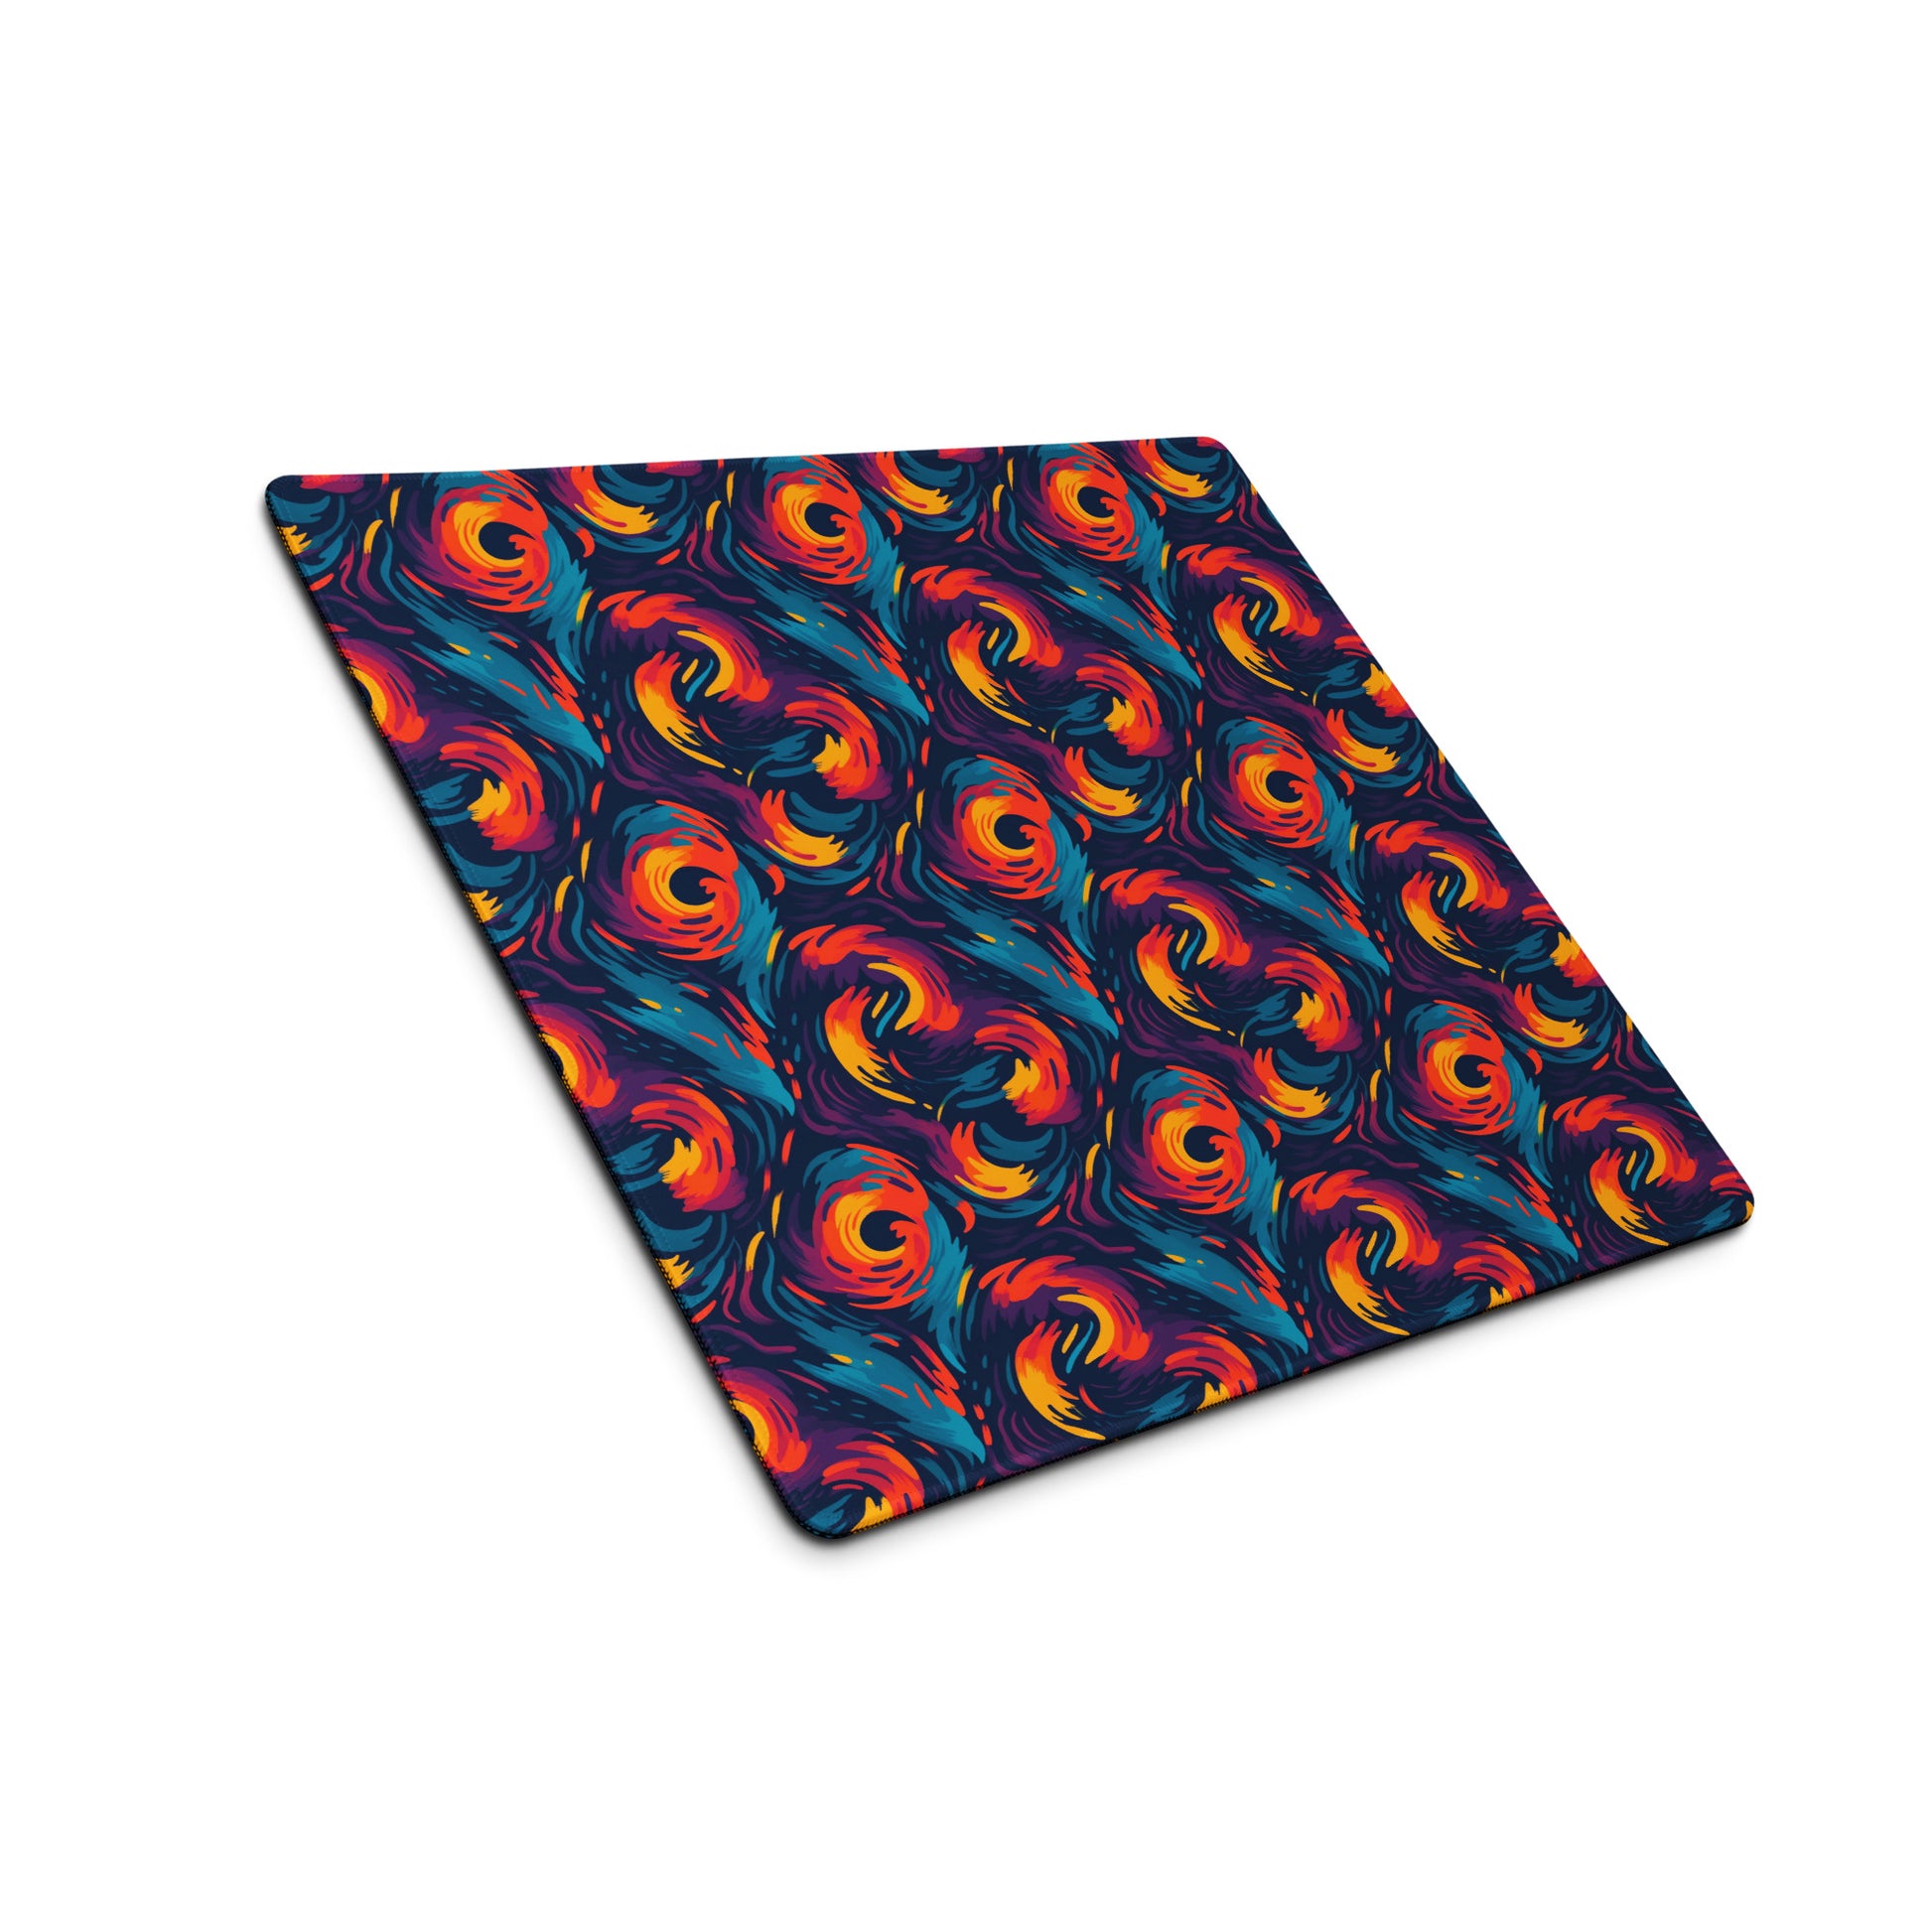 A 18" x 16" desk pad with fiery swirls on it shown at an angle. Red and Blue in color.